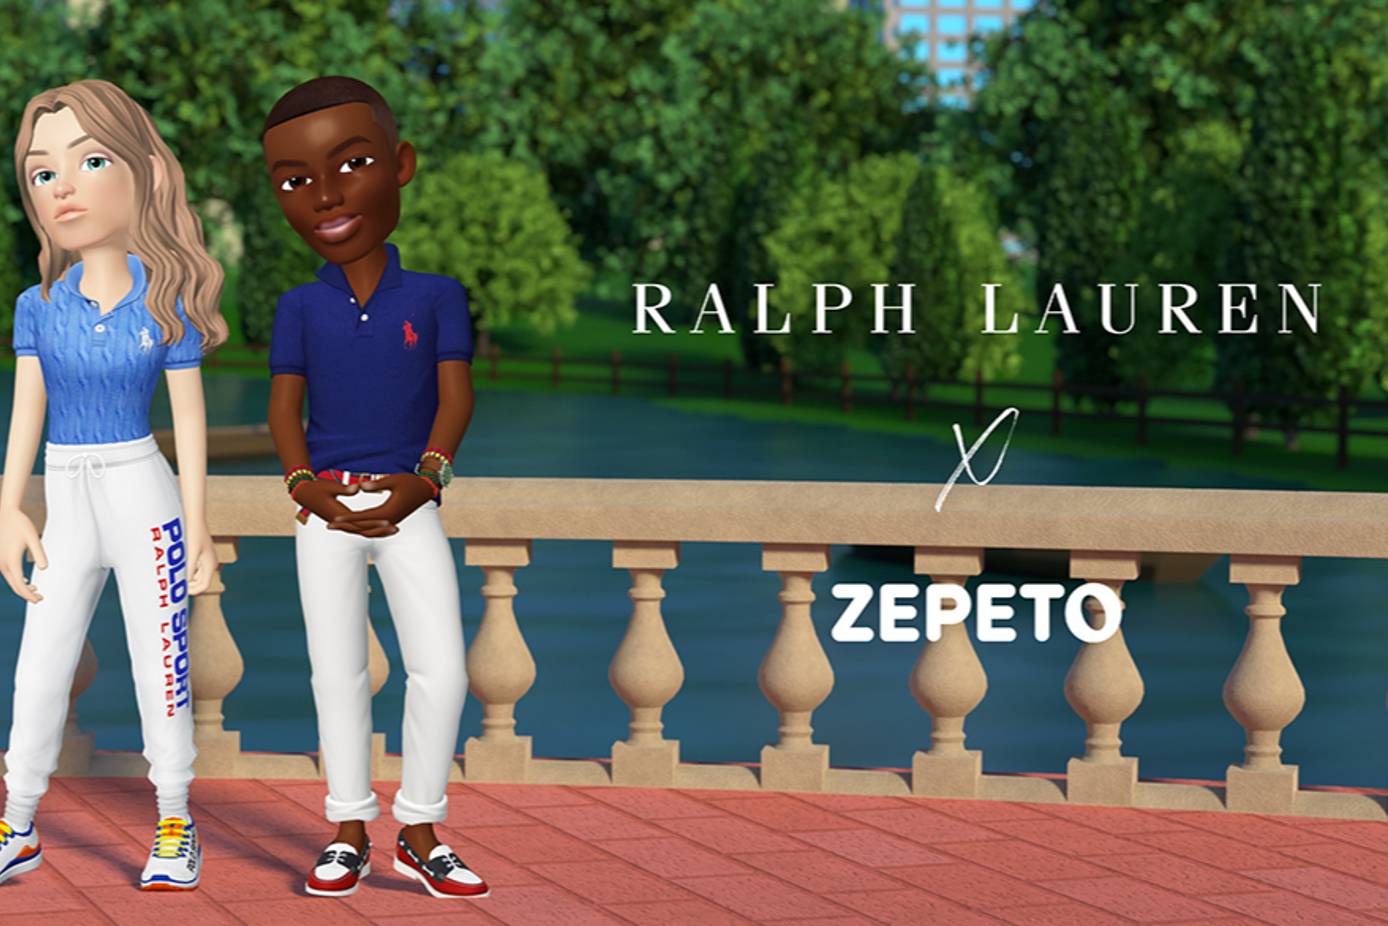 Ralph Lauren's approach to brand equity, Gen Z, and the metaverse